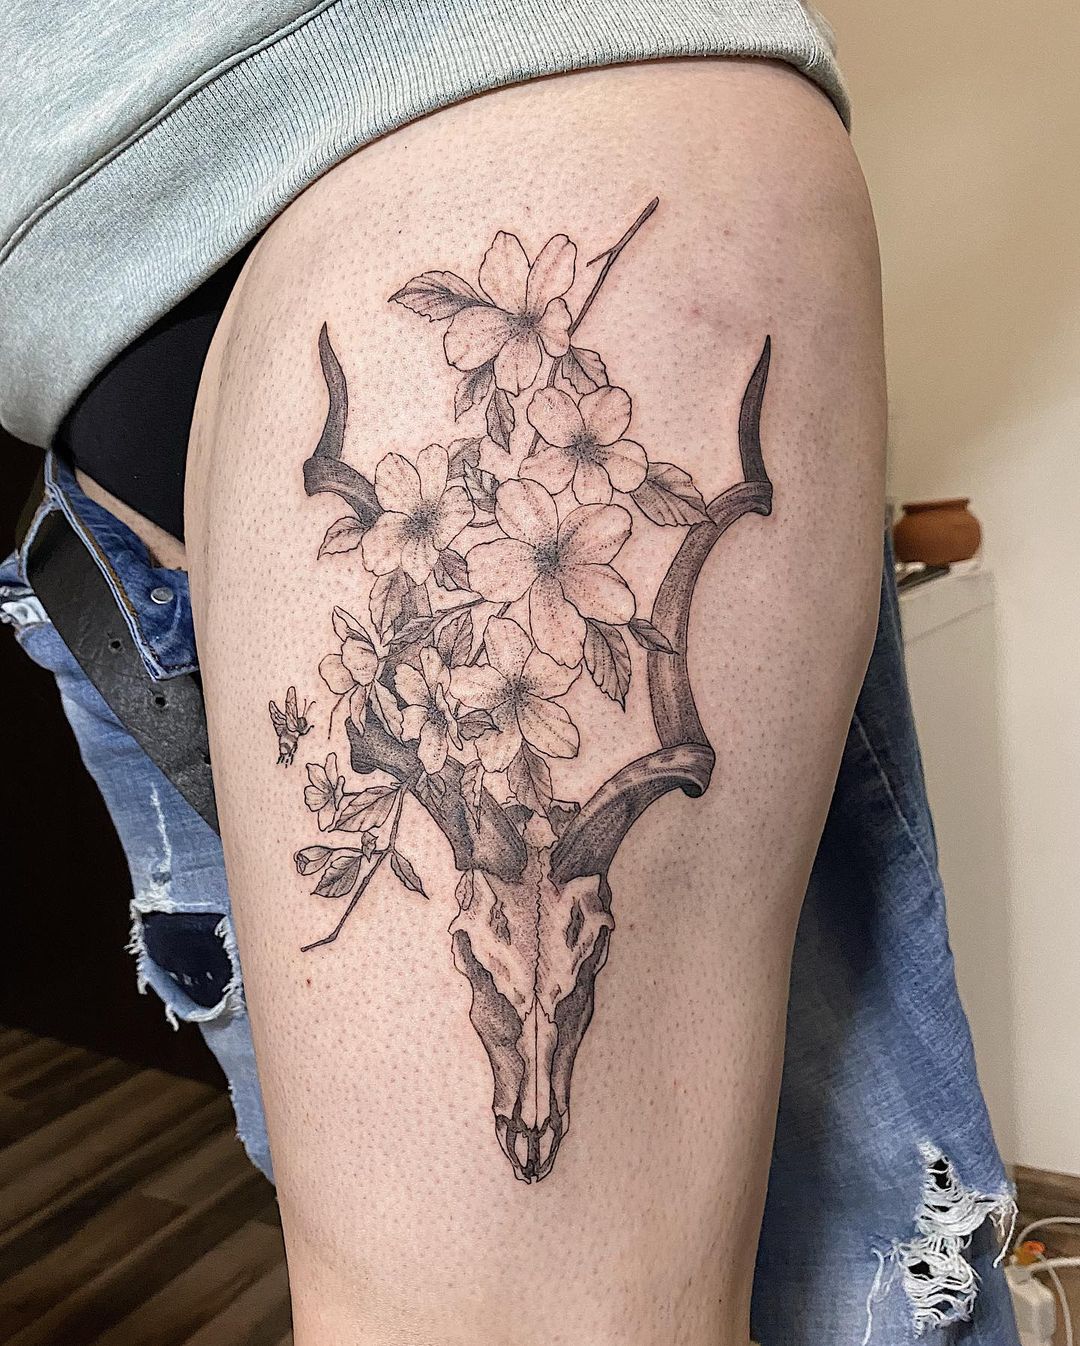  Grey Goat Skull And Flowers Thigh Tattoo